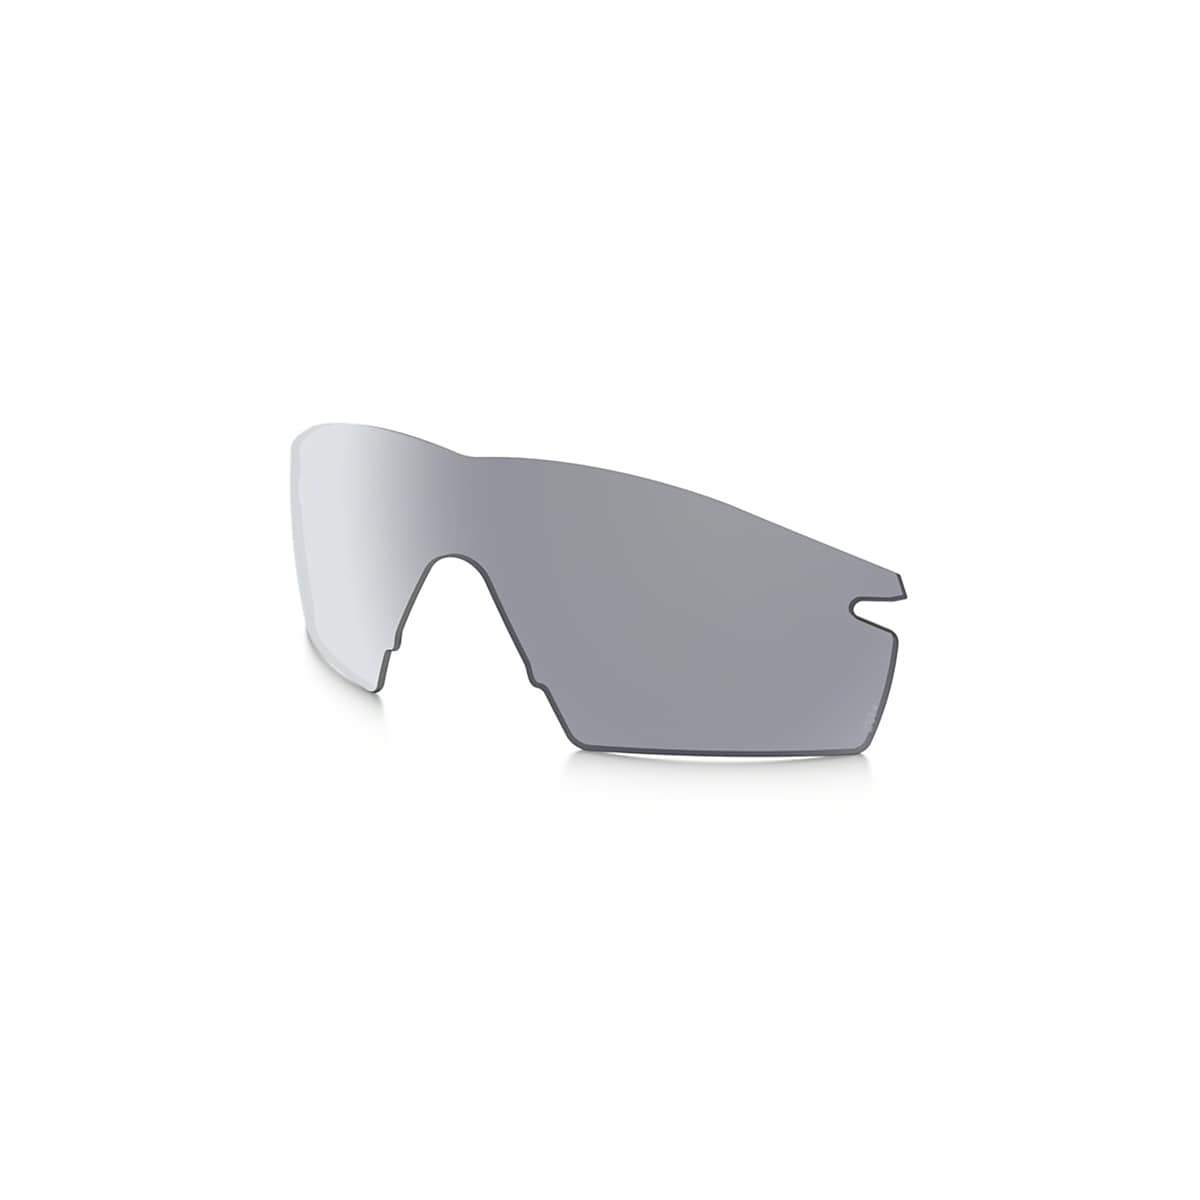 Oakley replacement lenses & repairs by Sunglass Fix™